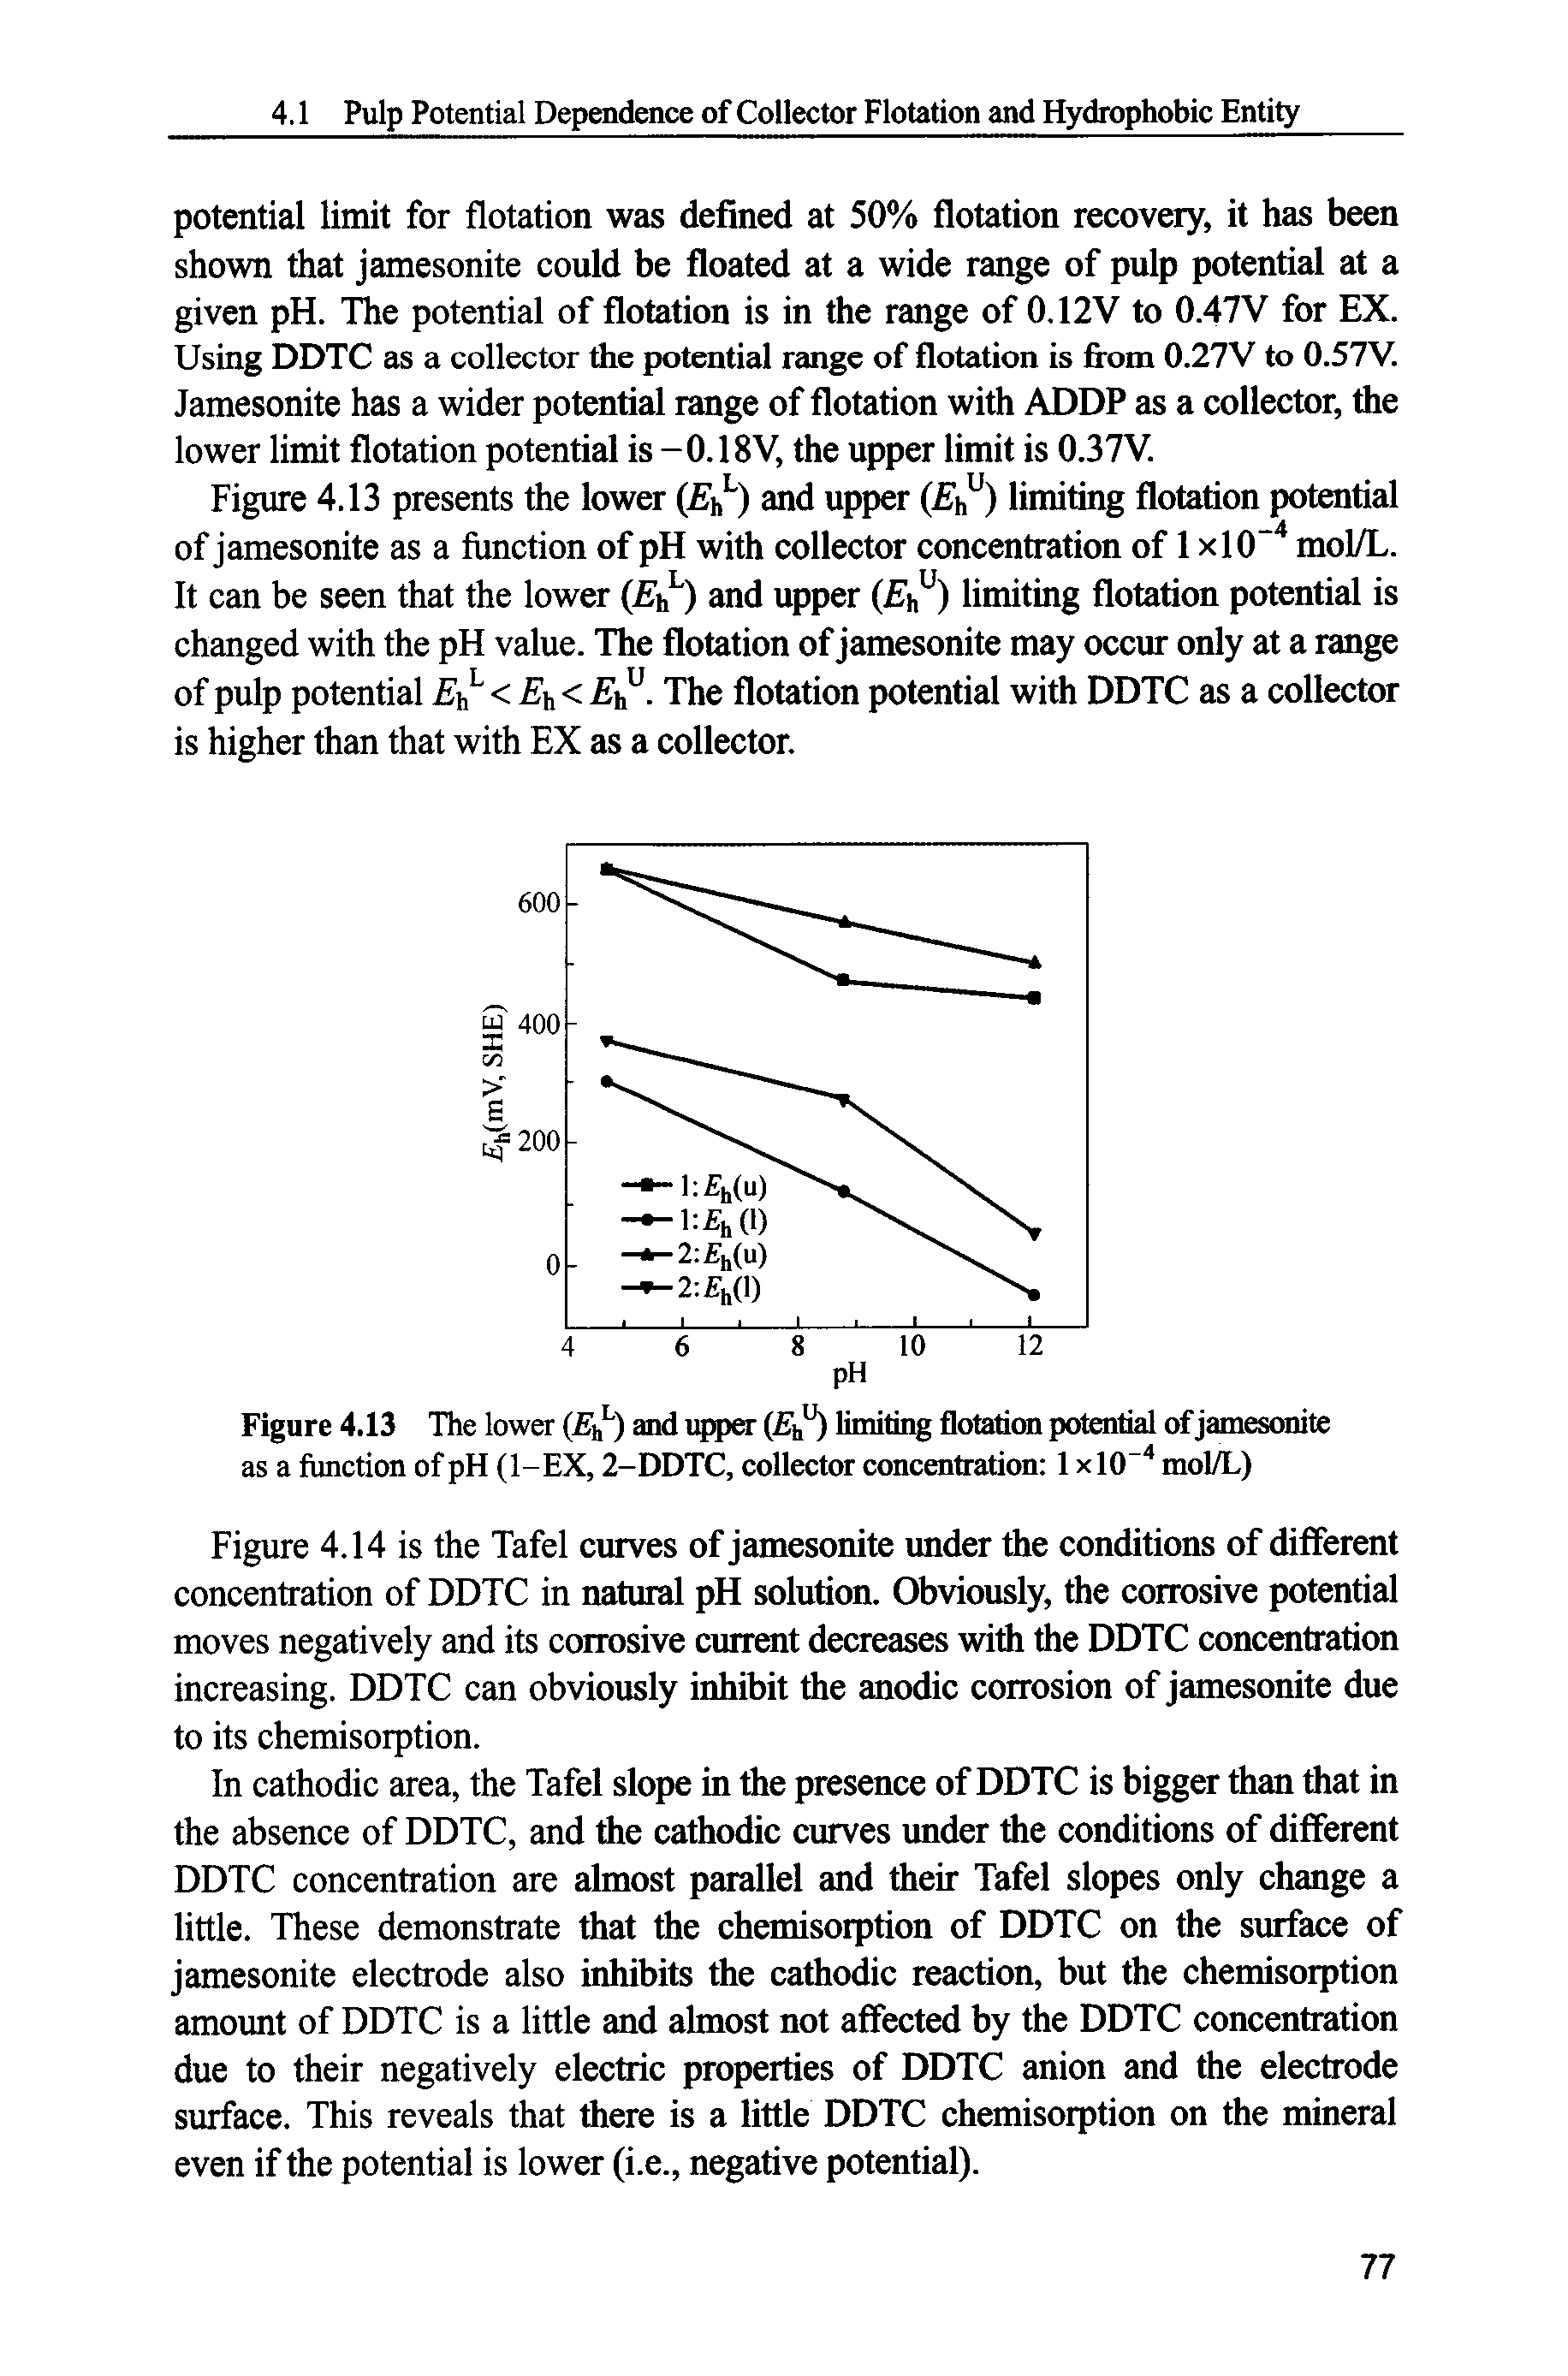 Figure 4.13 The lower (E ) and rqjper limiting flotation potential of jamesonite as a function of pH (1-EX, 2-DDTC, collector concentration 1 xlO" mol/L)...